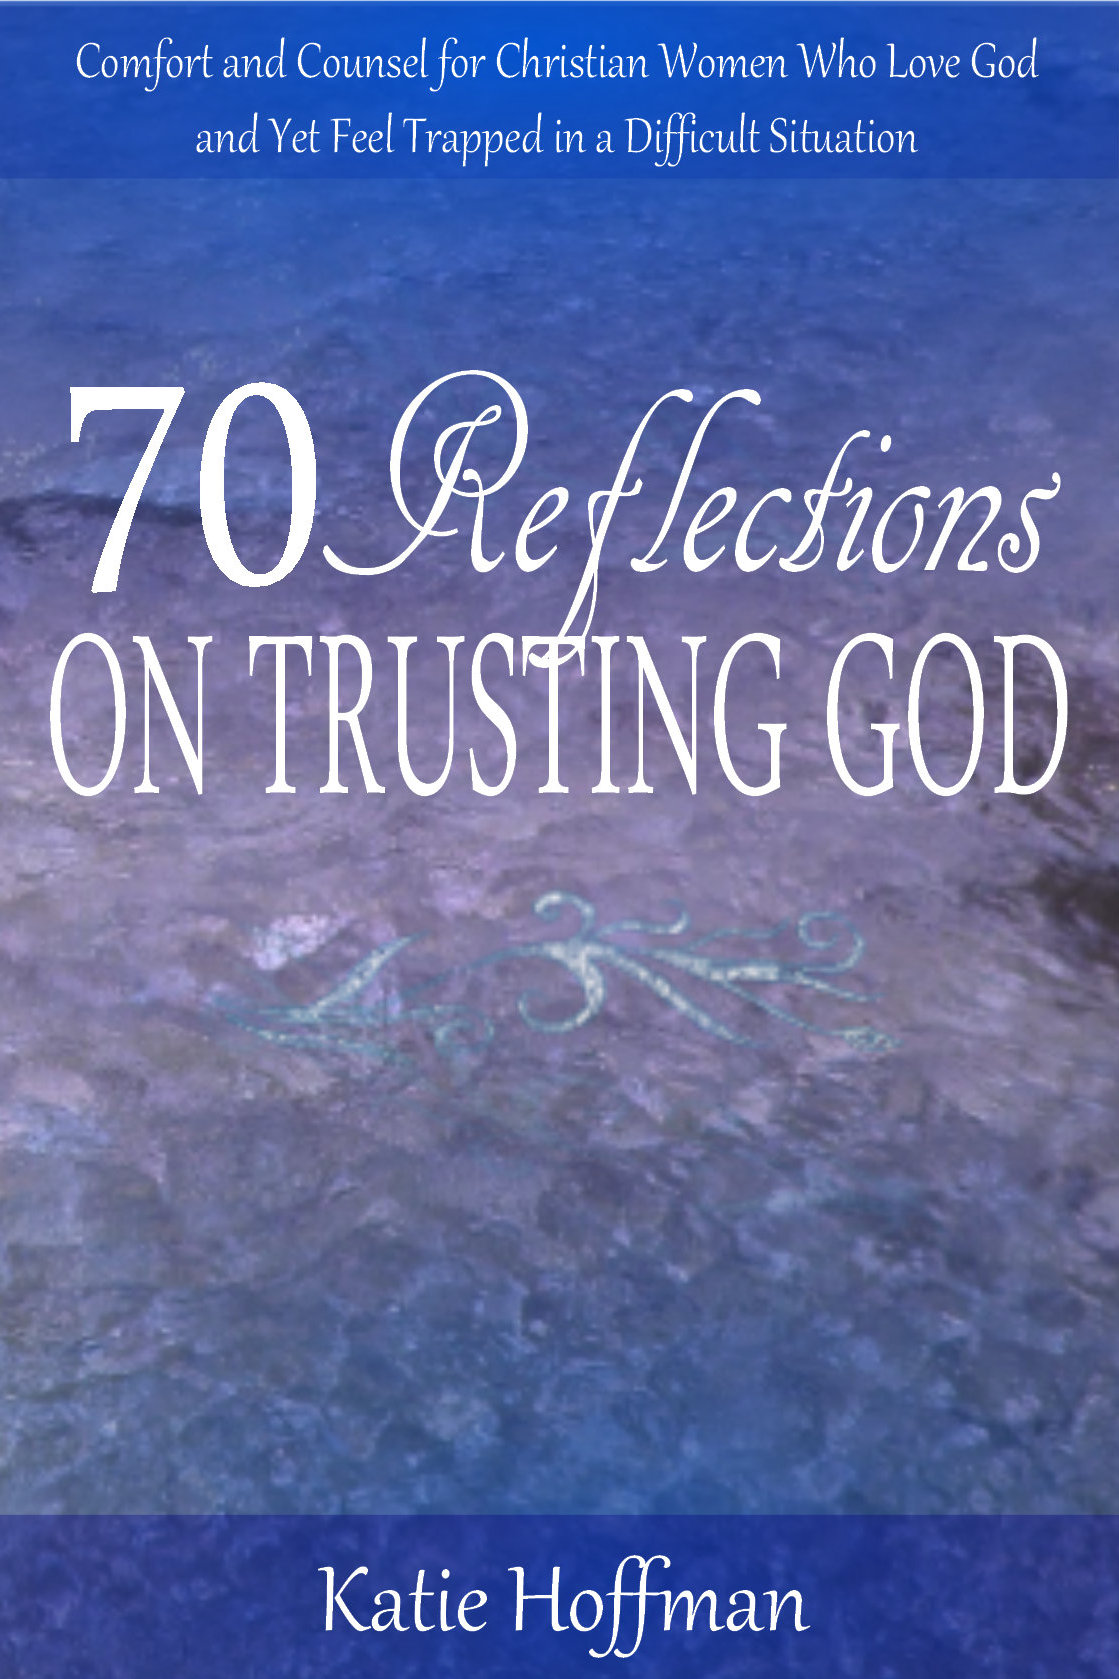 trusting God when you are trapped frustrated in despair